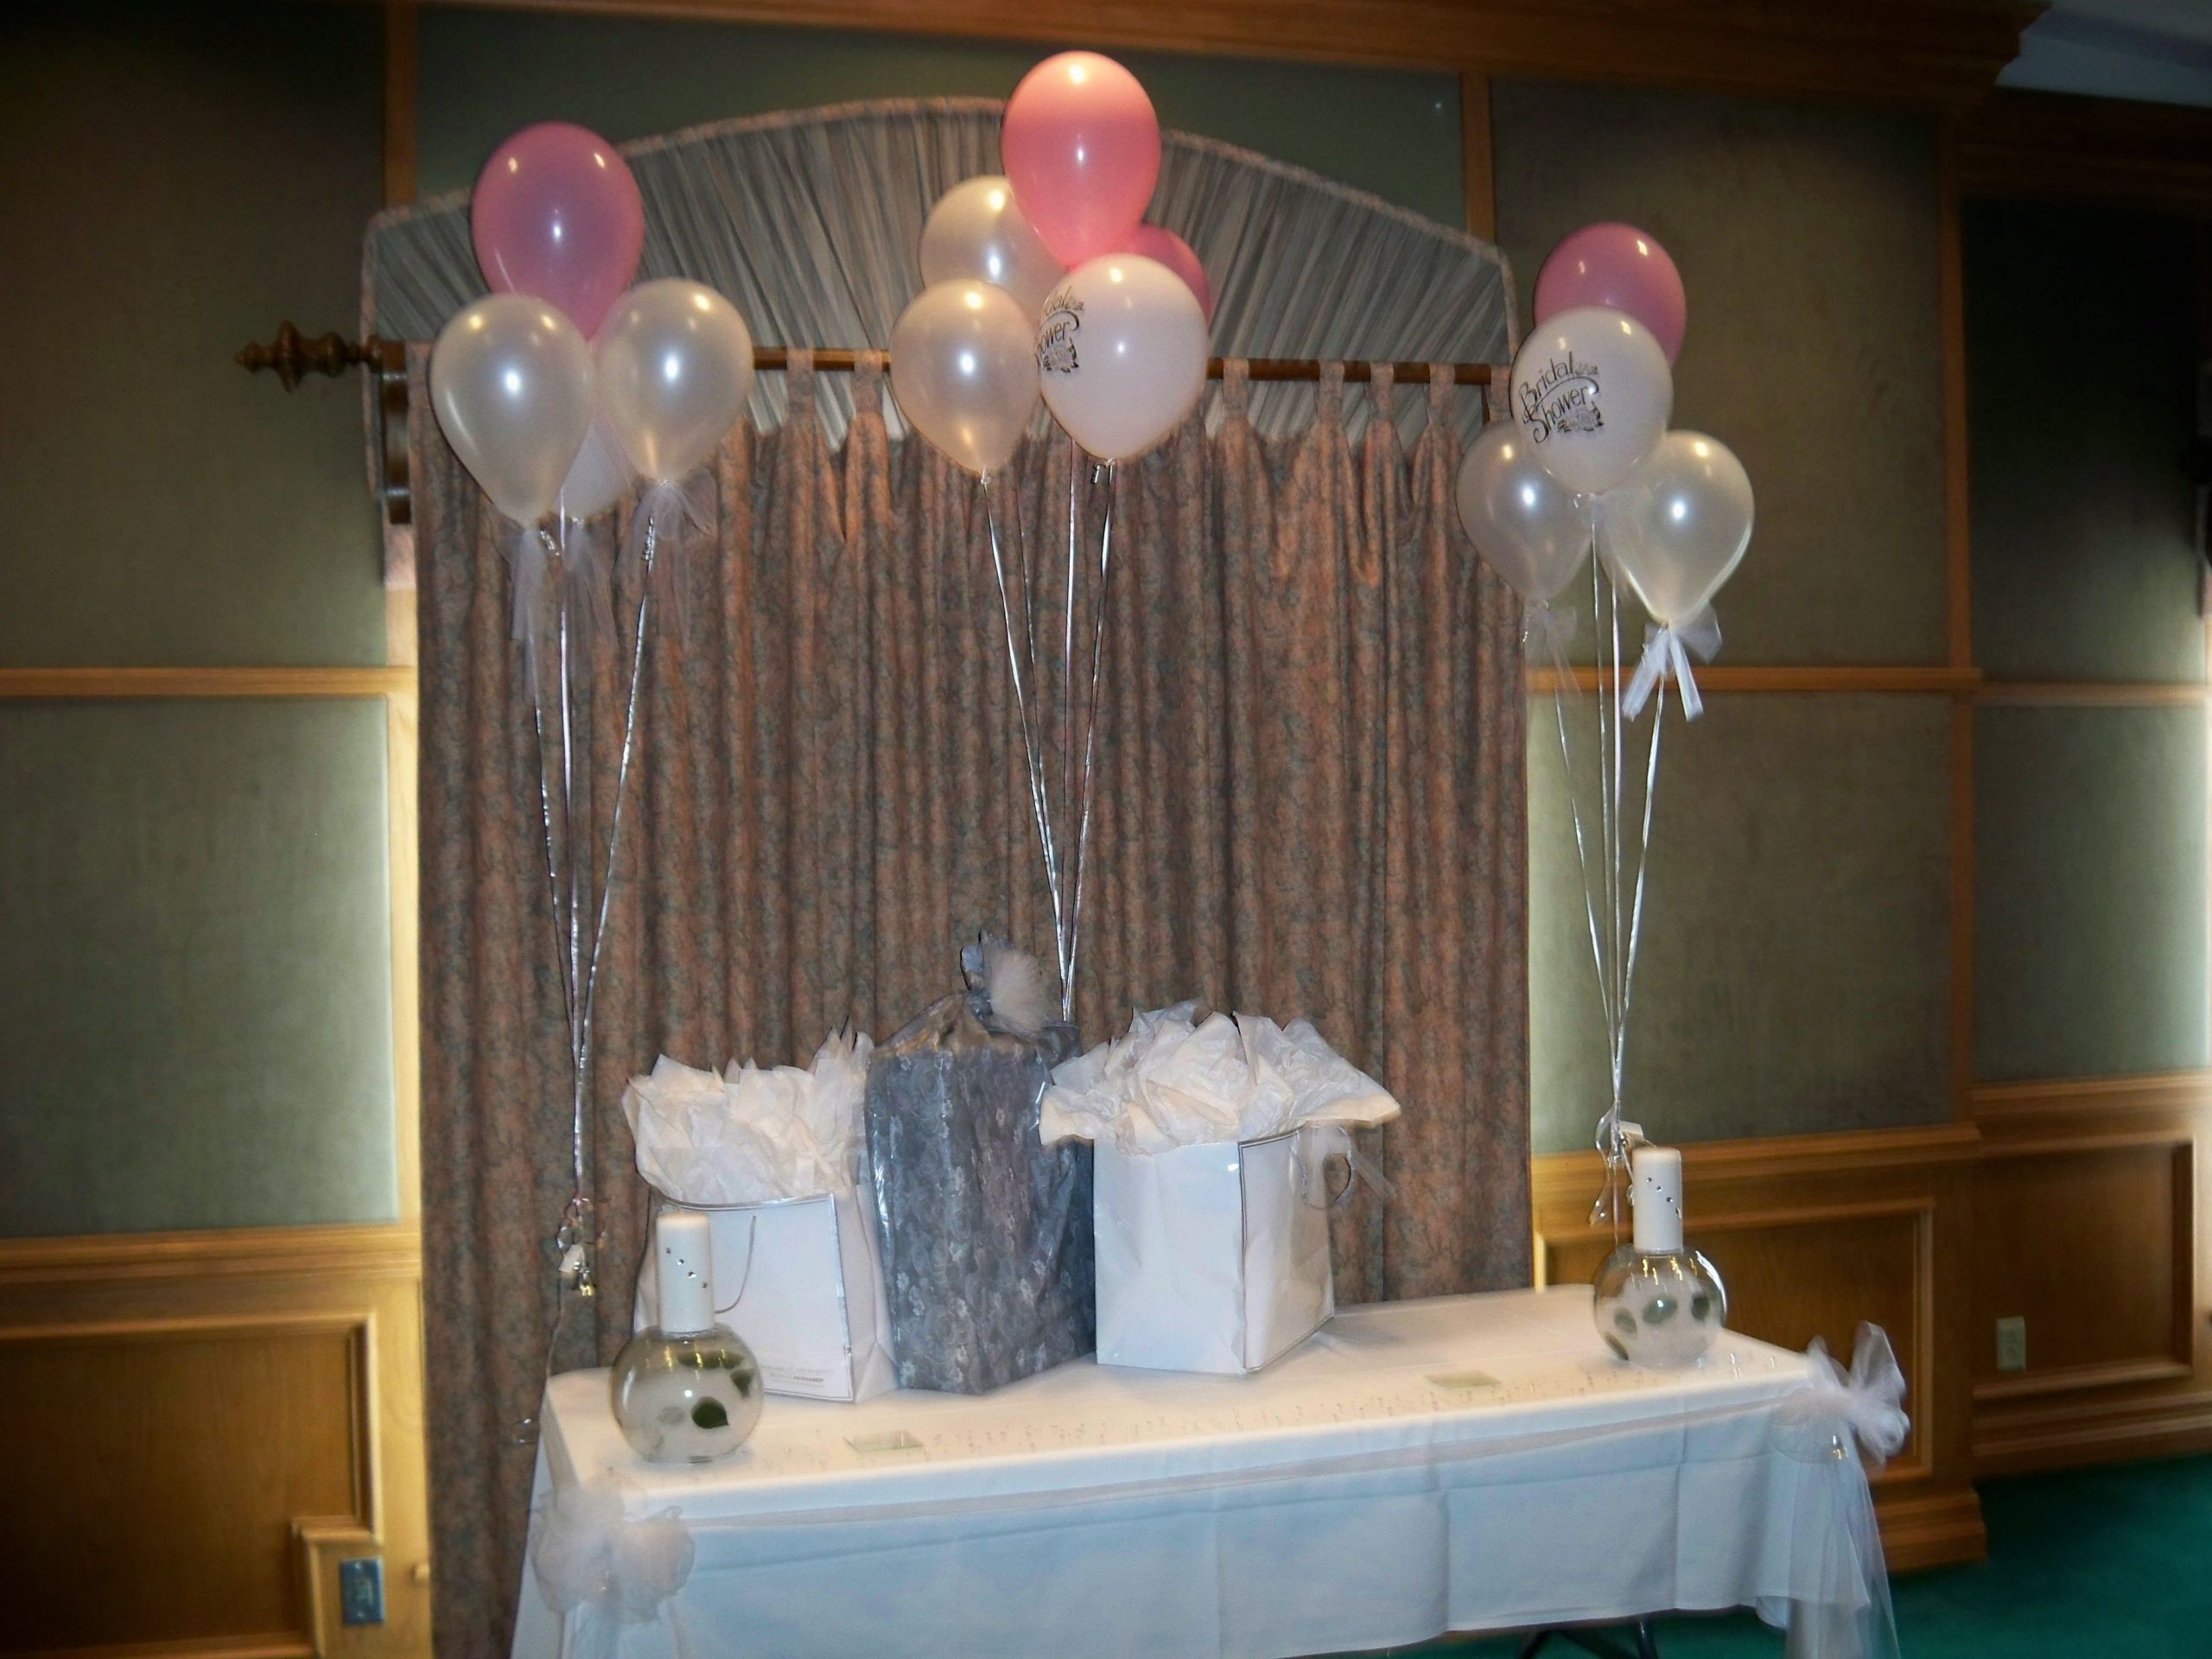 Gift Table Ideas For Baby Shower
 Baby shower t table Crafts for fun